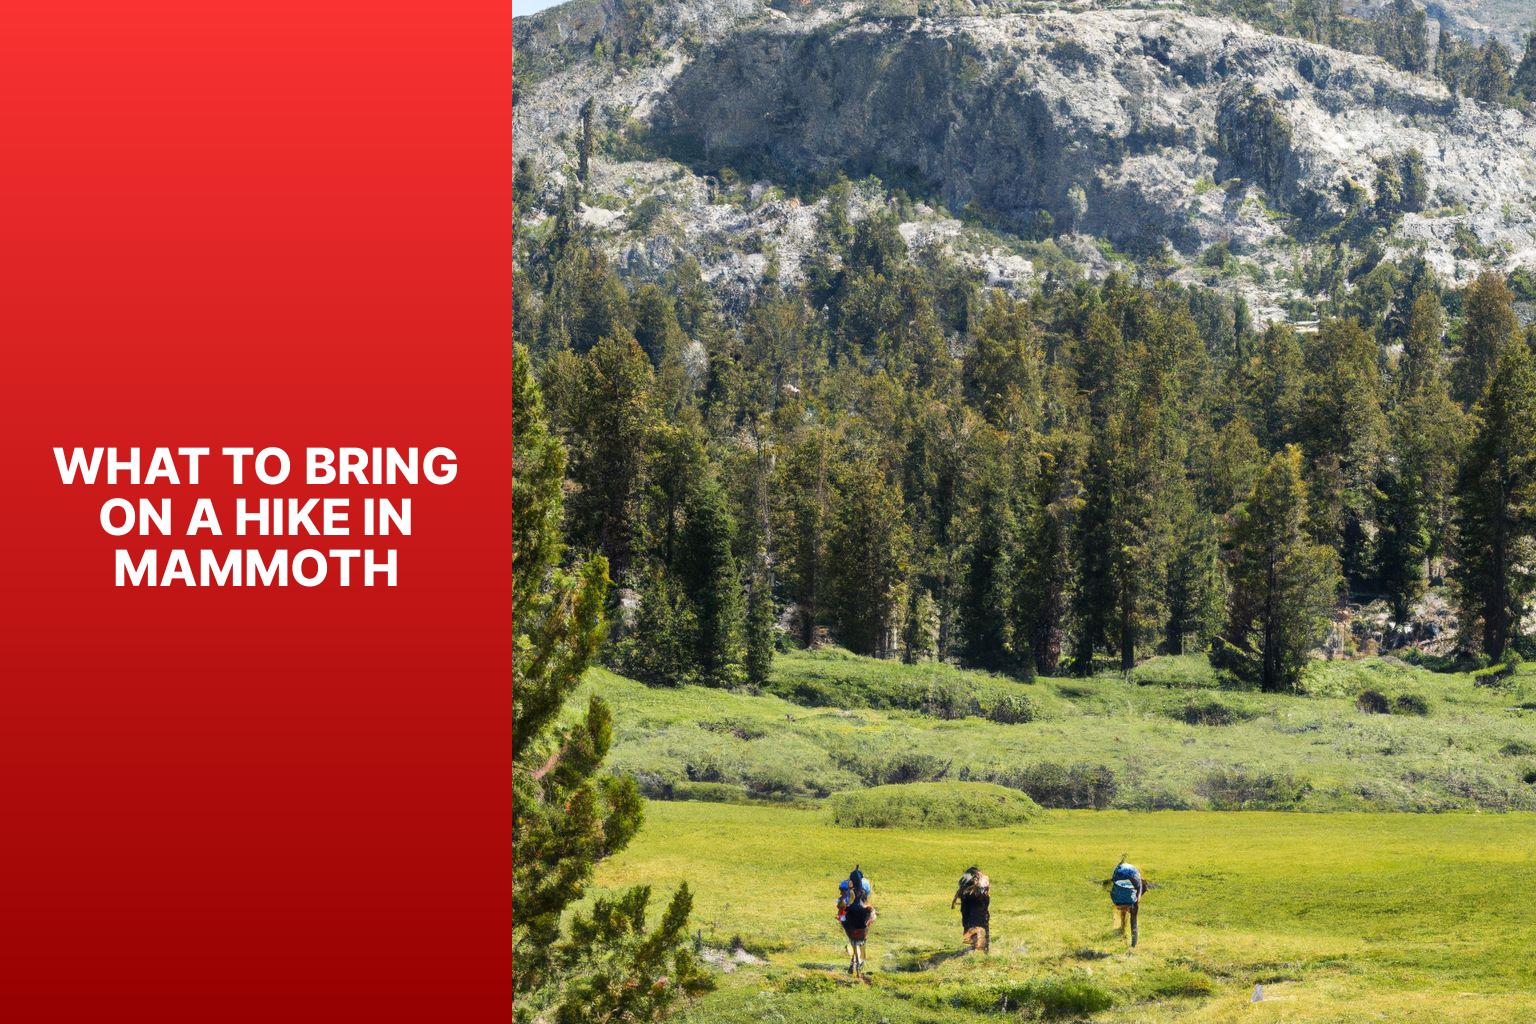 What to Bring on a Hike in Mammoth - Hikes in Mammoth 